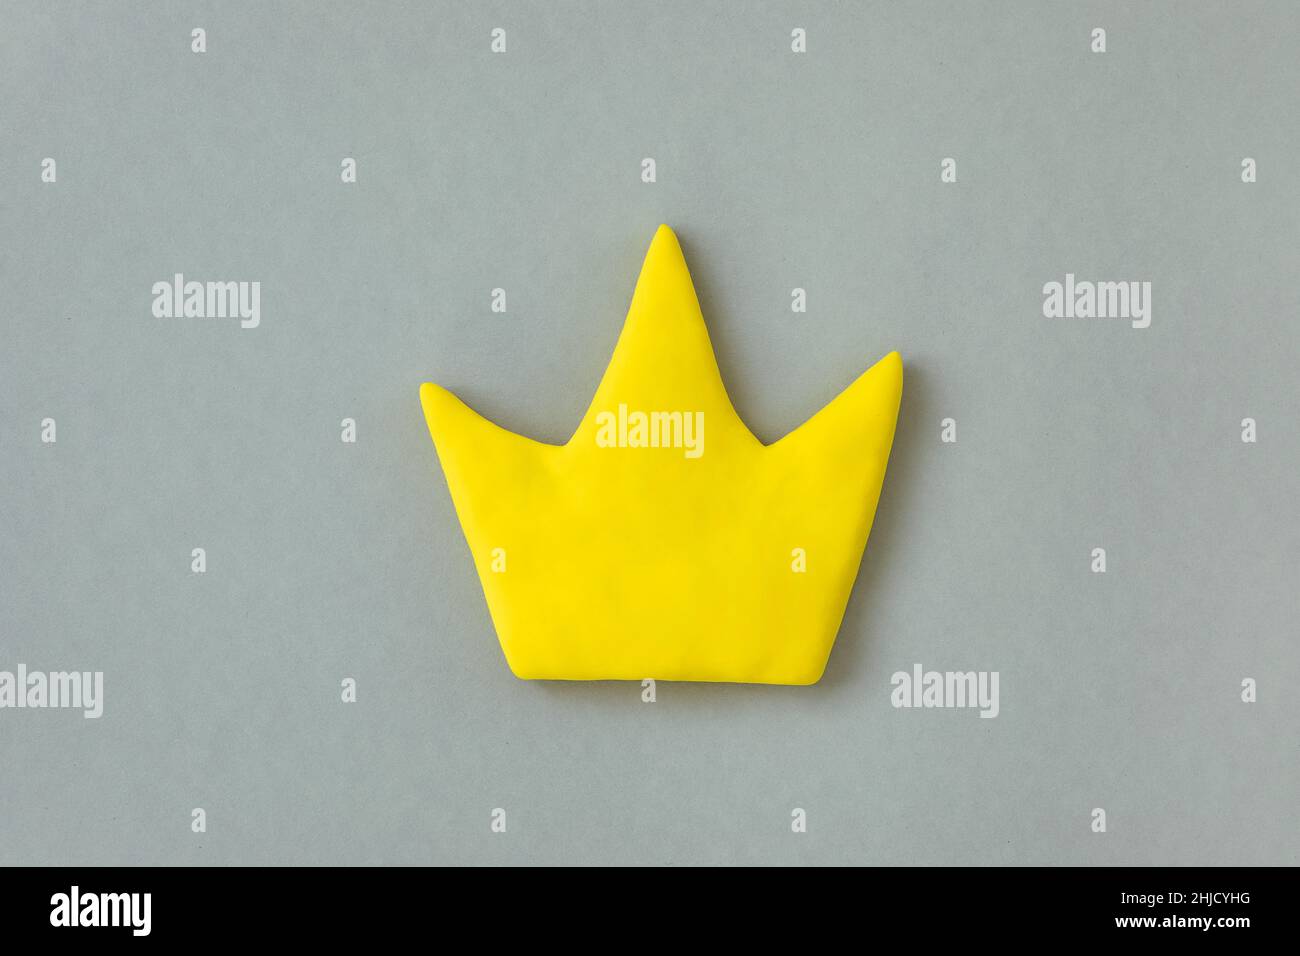 Simple 3d yellow crown symbol on gray background. Concept of win and success, top rank quality status. Stock Photo